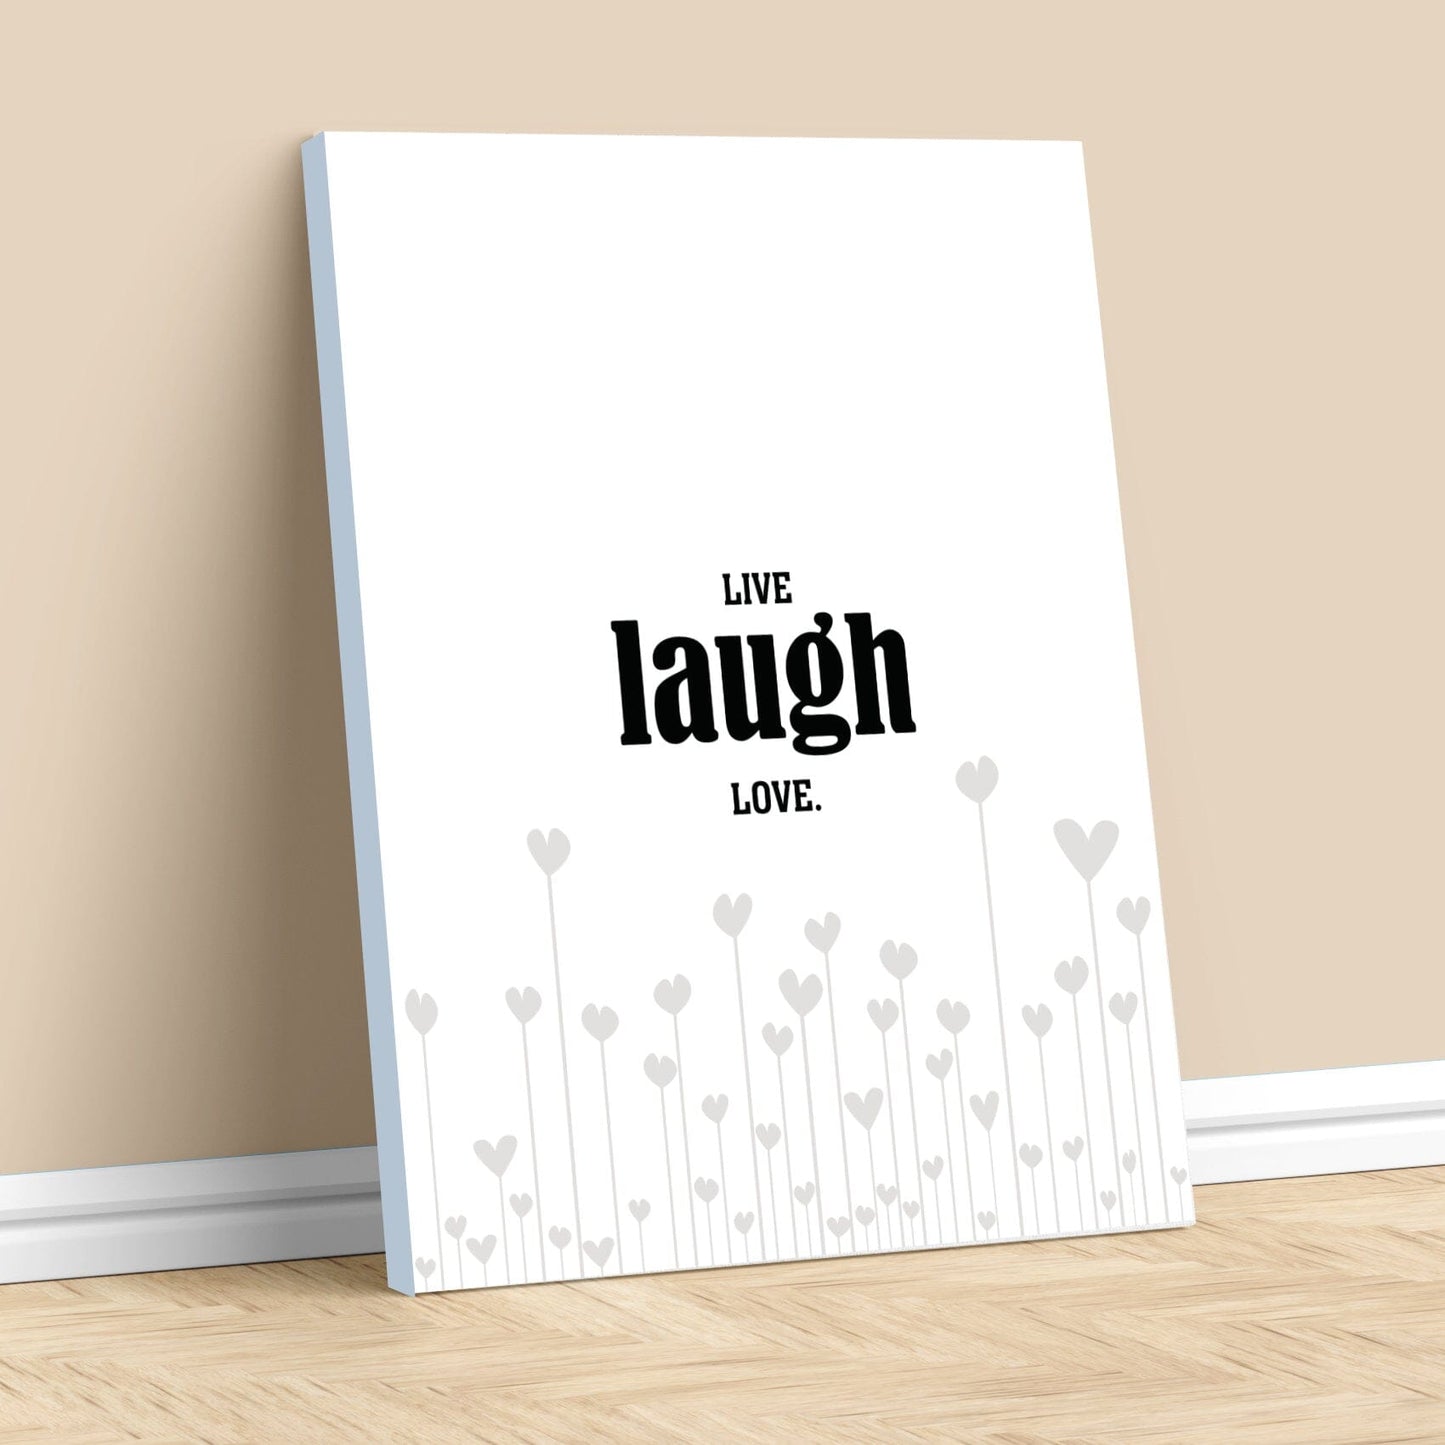 Light-Hearted Wall Art - Live Laugh Love - Wise and Witty Wise and Wiseass Quotes Song Lyrics Art 11x14 Canvas Wrap 